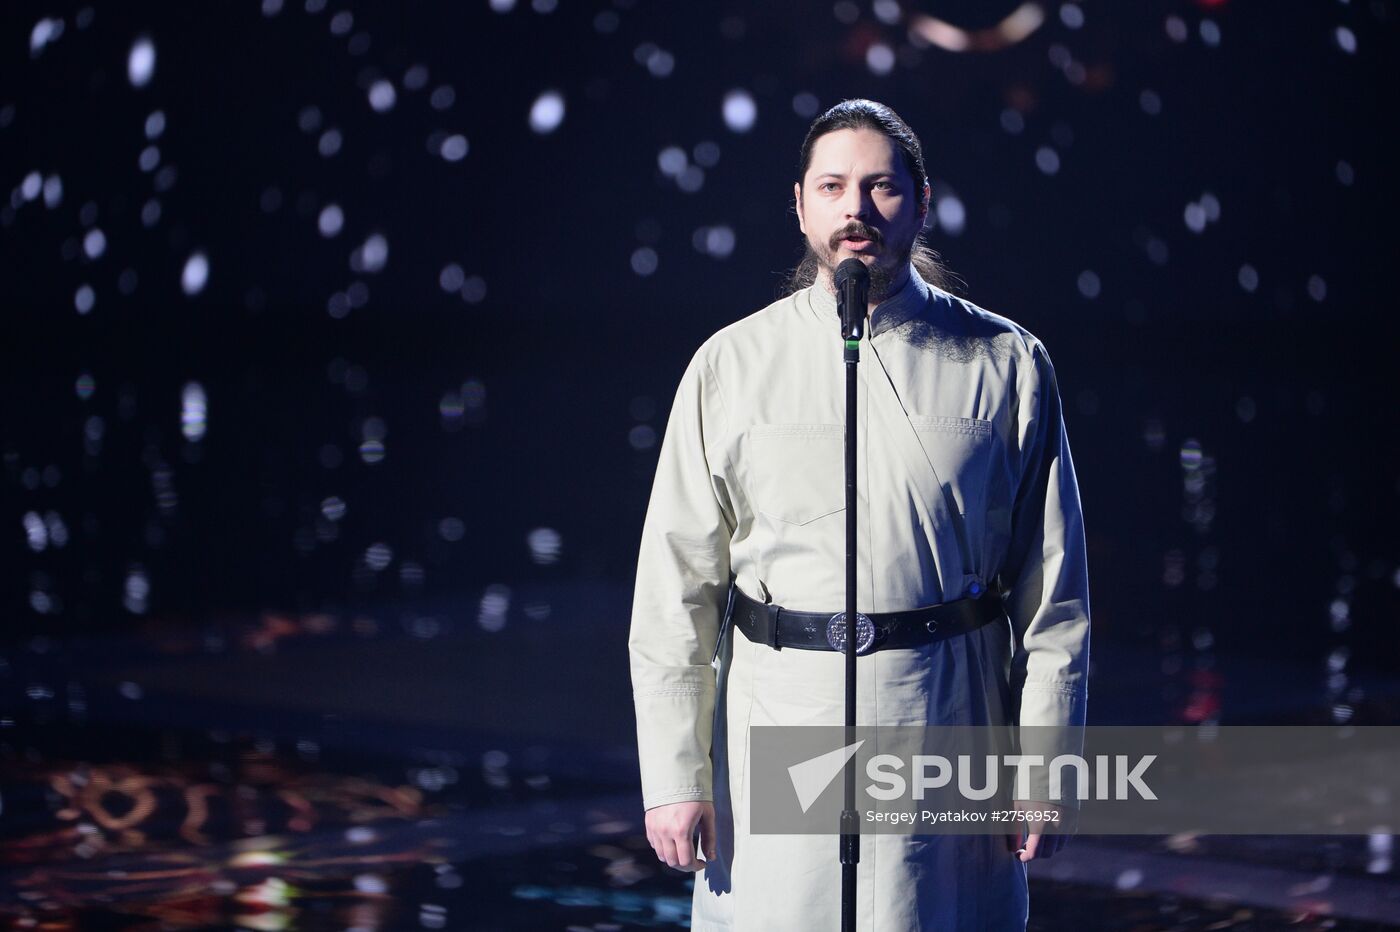 Monk-priest Fotiy takes part in The Voice of Russia music project